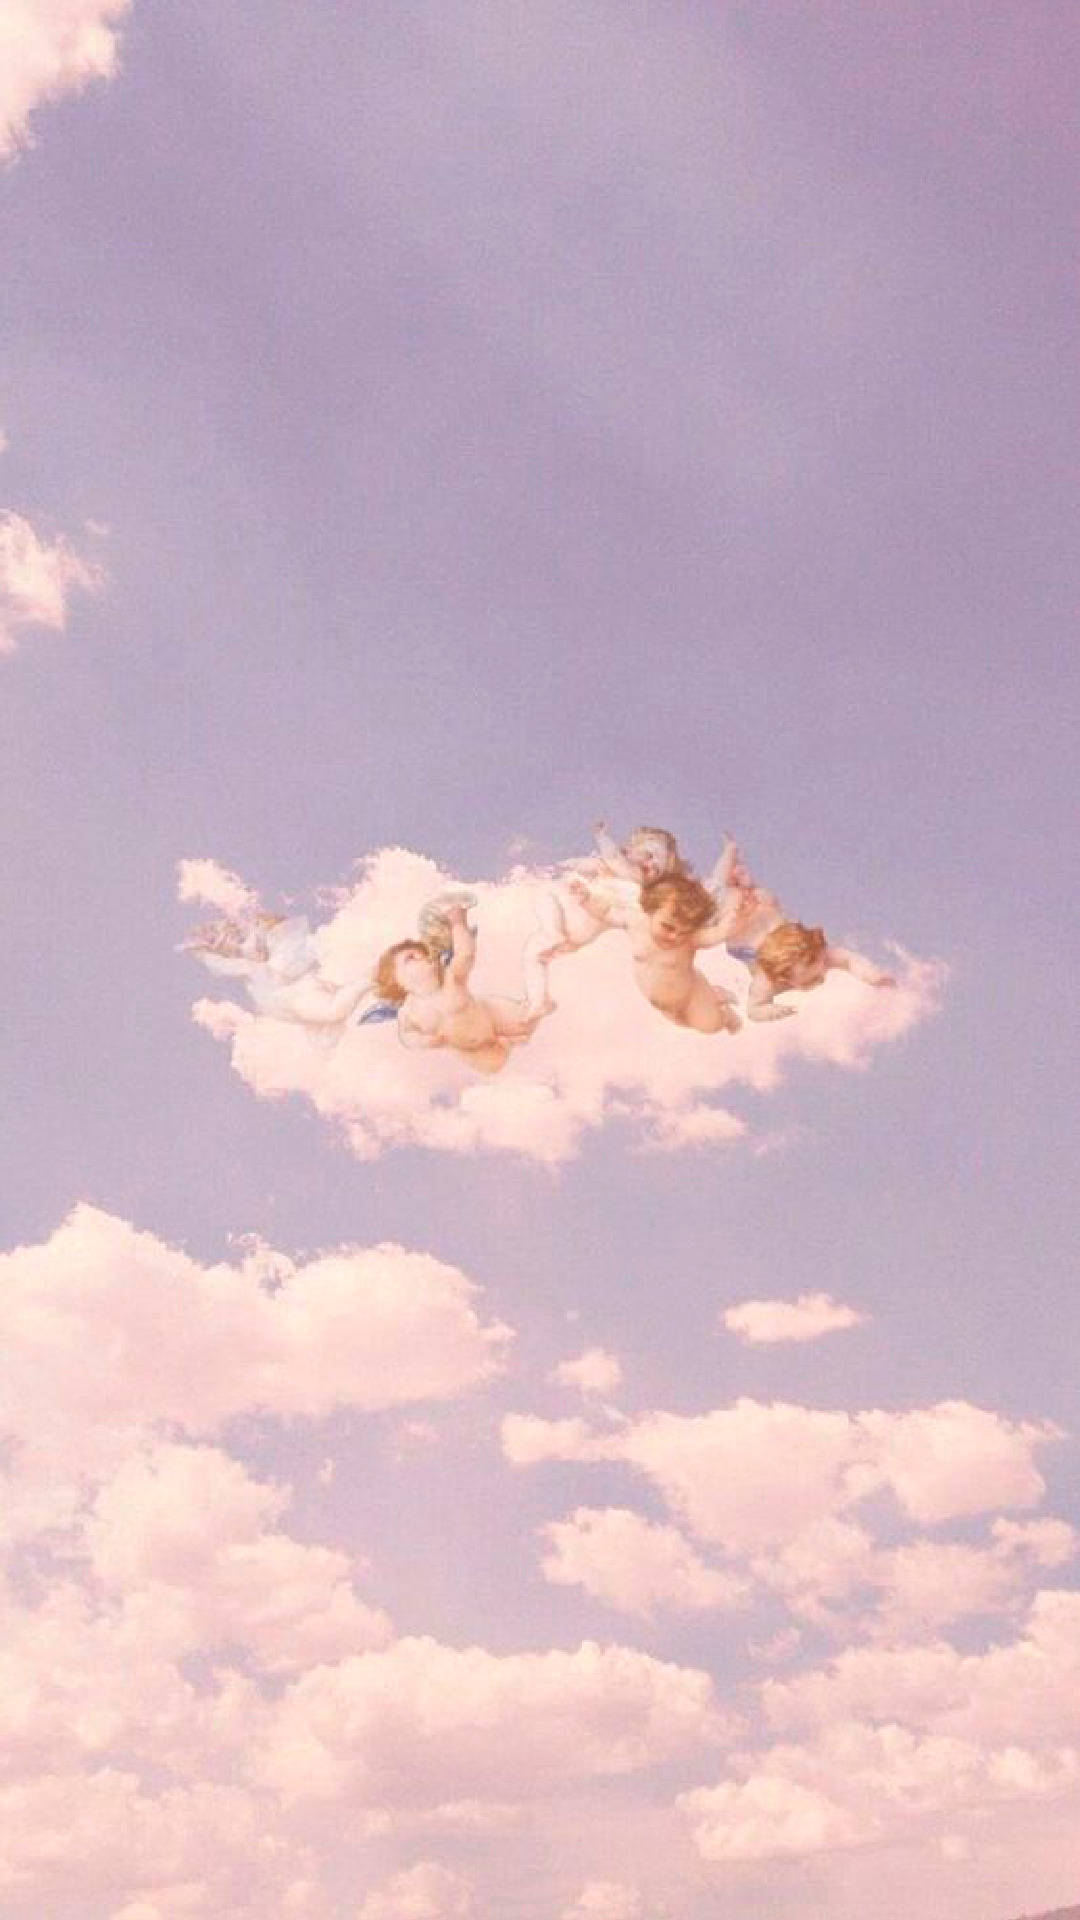 Vintage Aesthetic Clouds Cherub Angels Picture